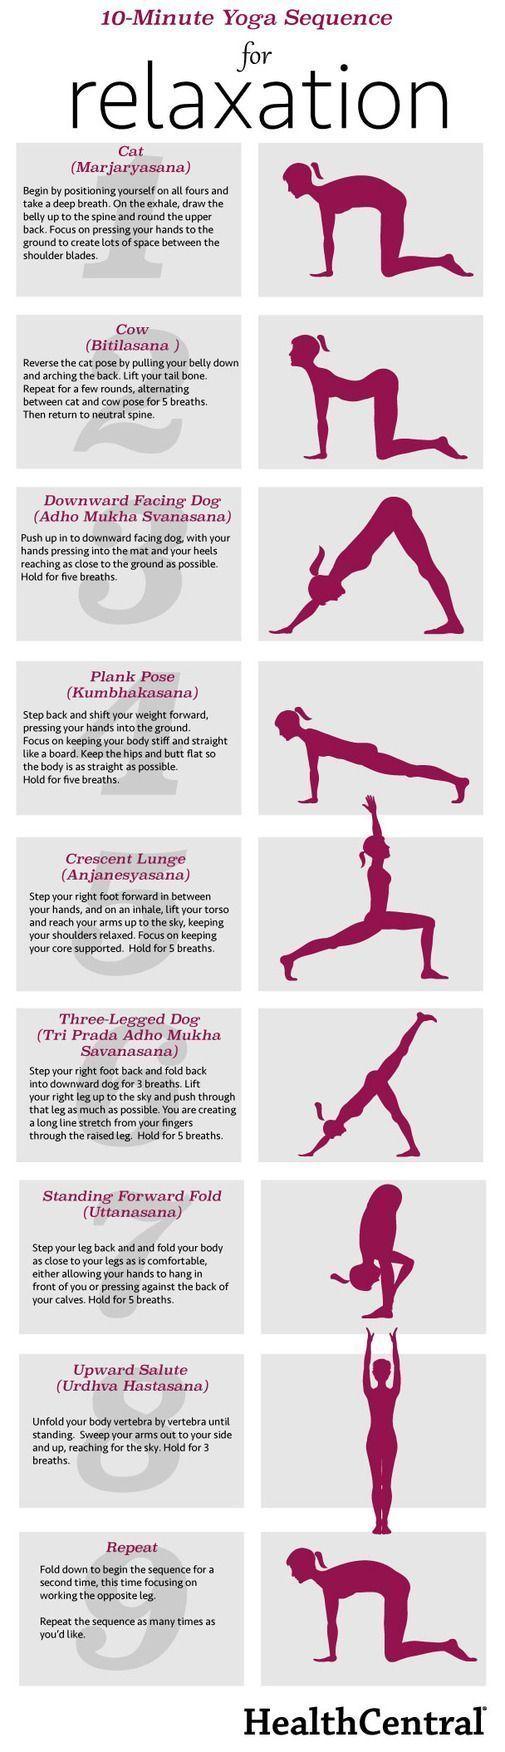 Hochzeit - 10-Minute Yoga Sequence For Relaxation (INFOGRAPHIC) - Exercise - Anxiety